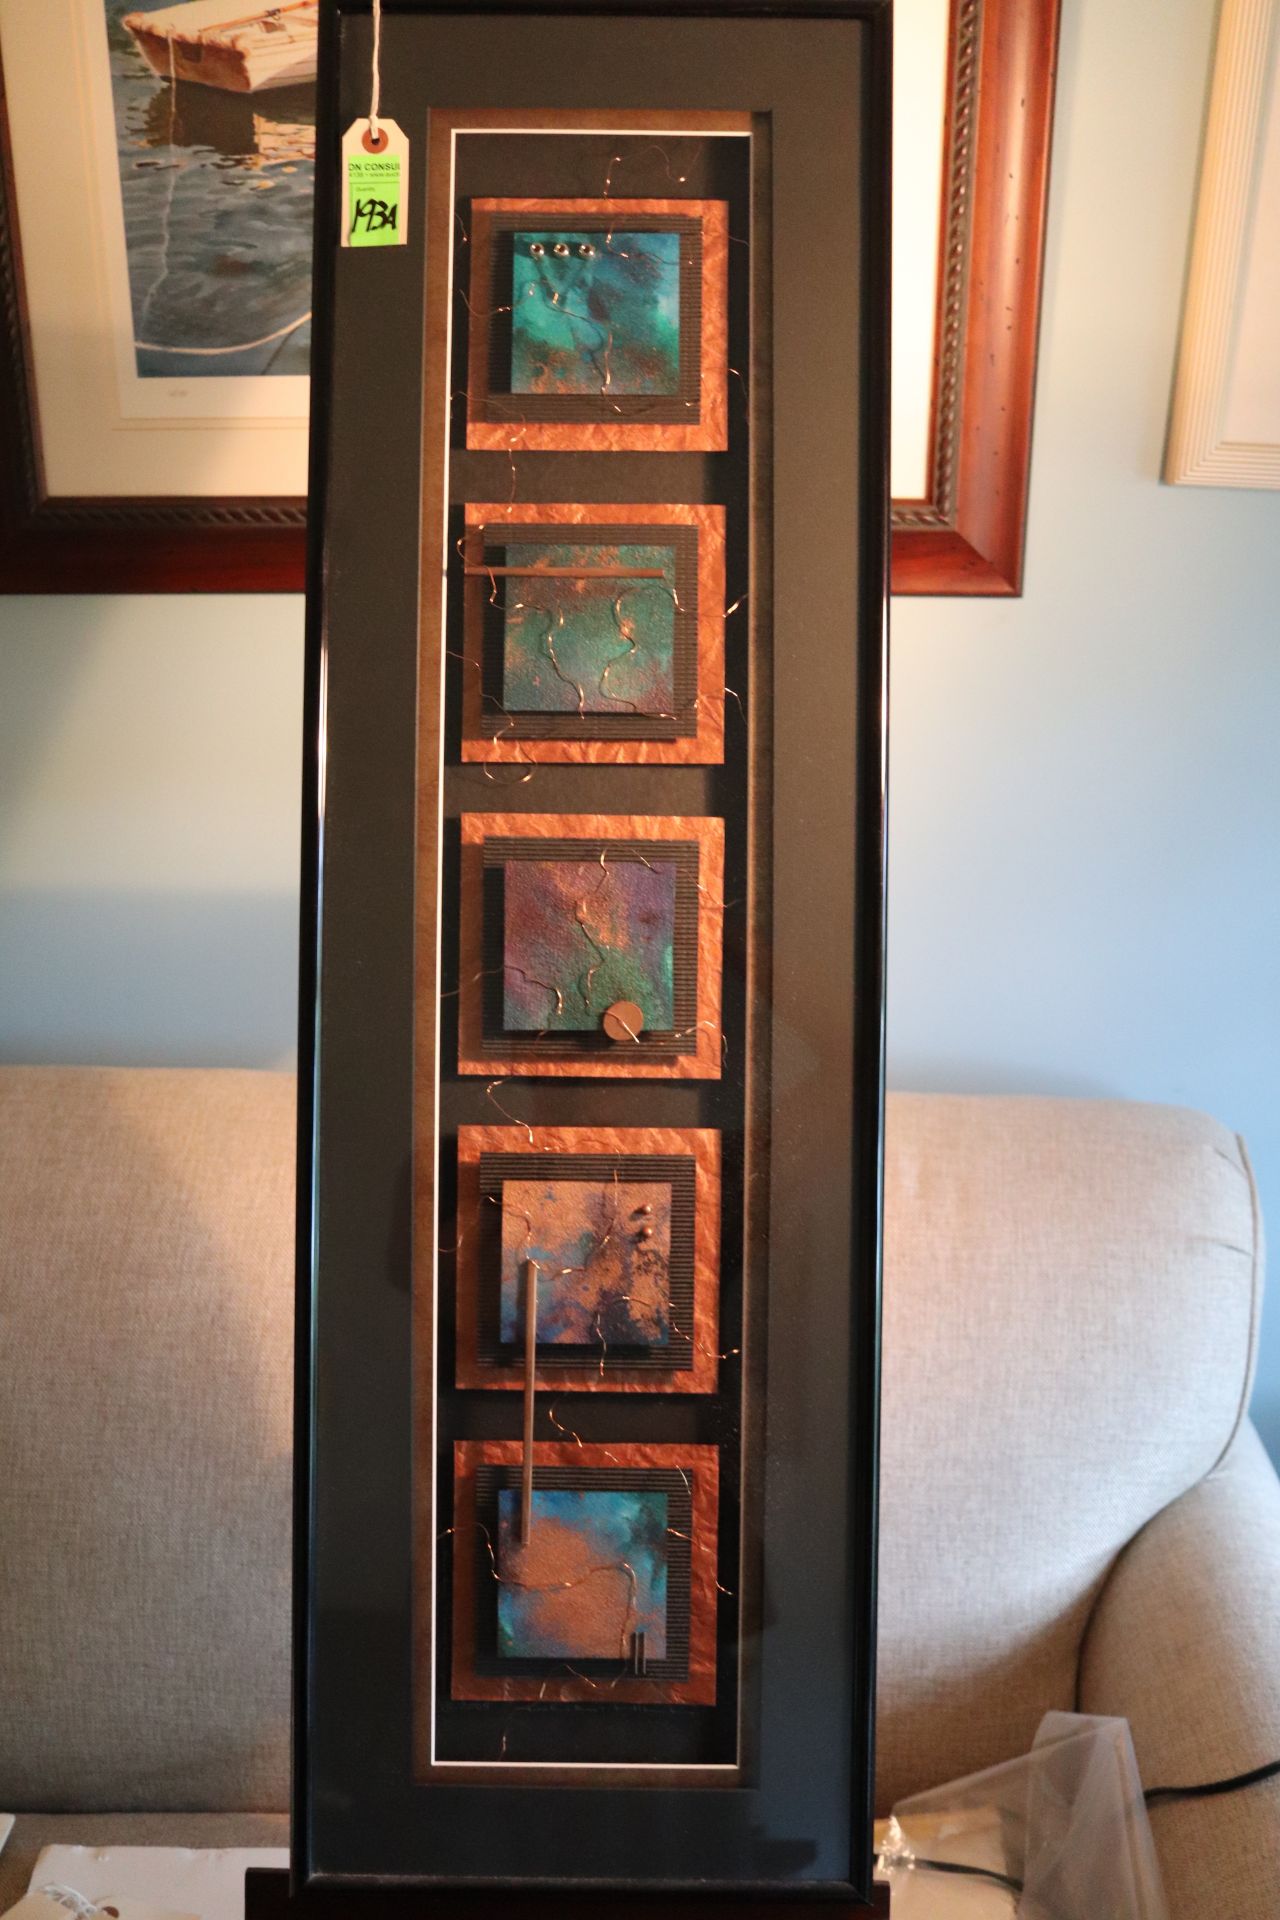 Framed artwork, mixed media, composed of metal, foil, copper wire and beads, "Precious Jewels with C